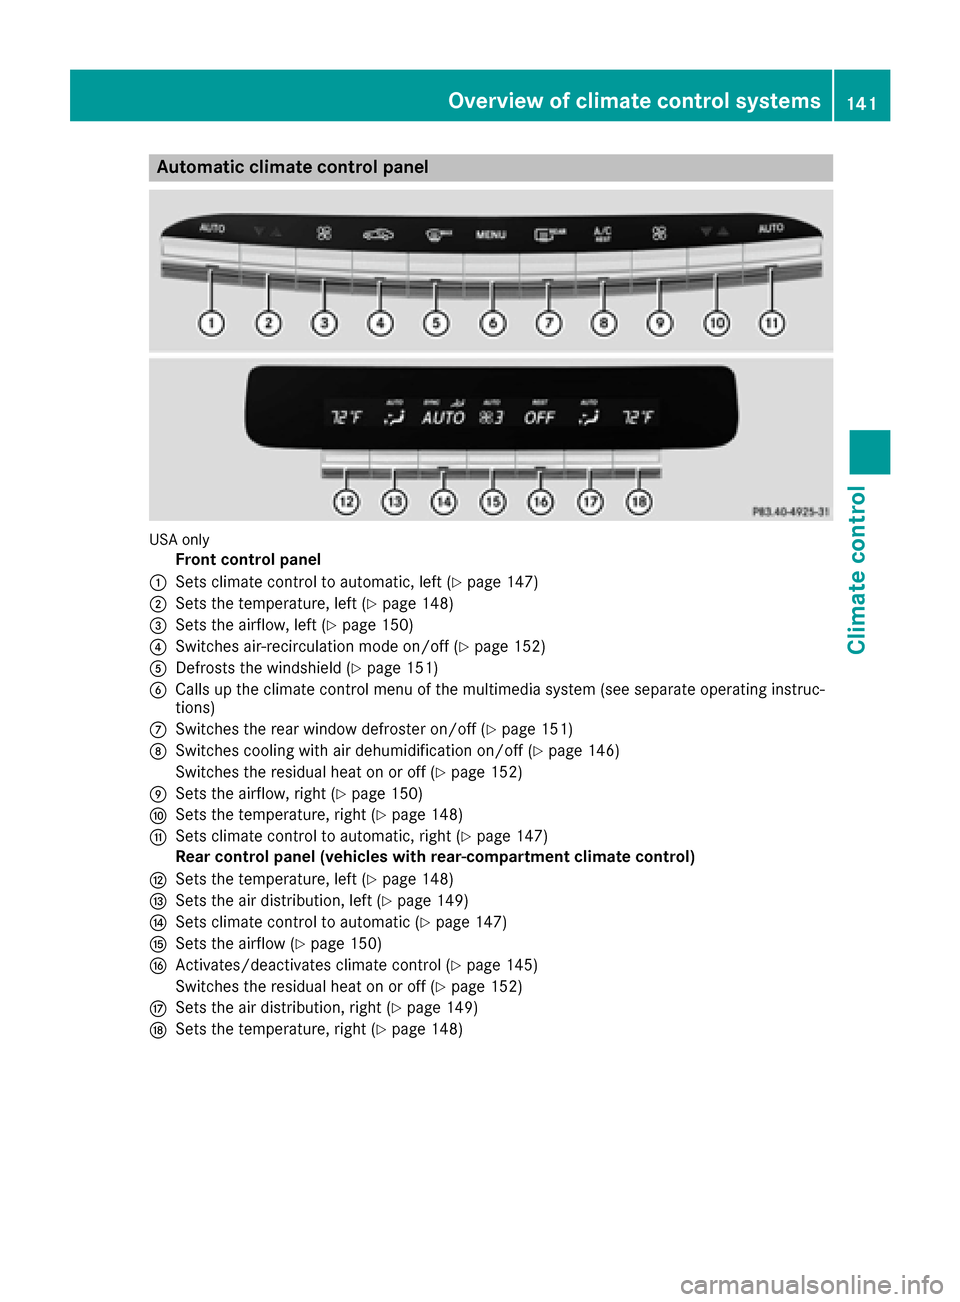 MERCEDES-BENZ S-Class SEDAN 2016 W222 User Guide Automa tic climate control panel
USAonly
Front control panel
:Sets climat econtrol to automatic, lef t (Ypage 147)
;Sets thetemperature, lef t (Ypage 148)
=Sets theairflow, lef t (Ypage 150)
?Switches